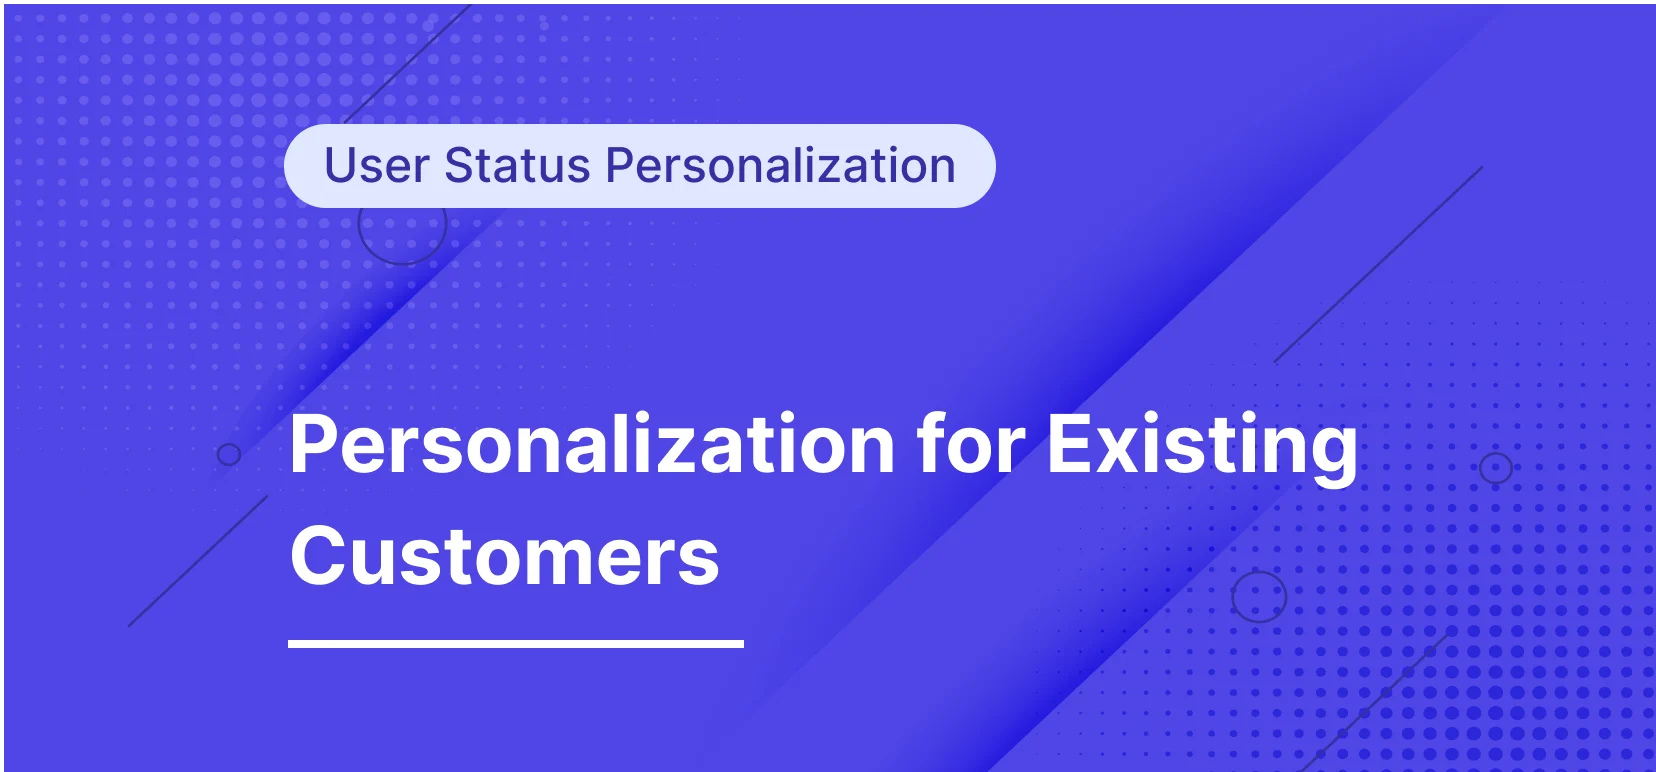 How to Upsell Existing Customers with Personalization